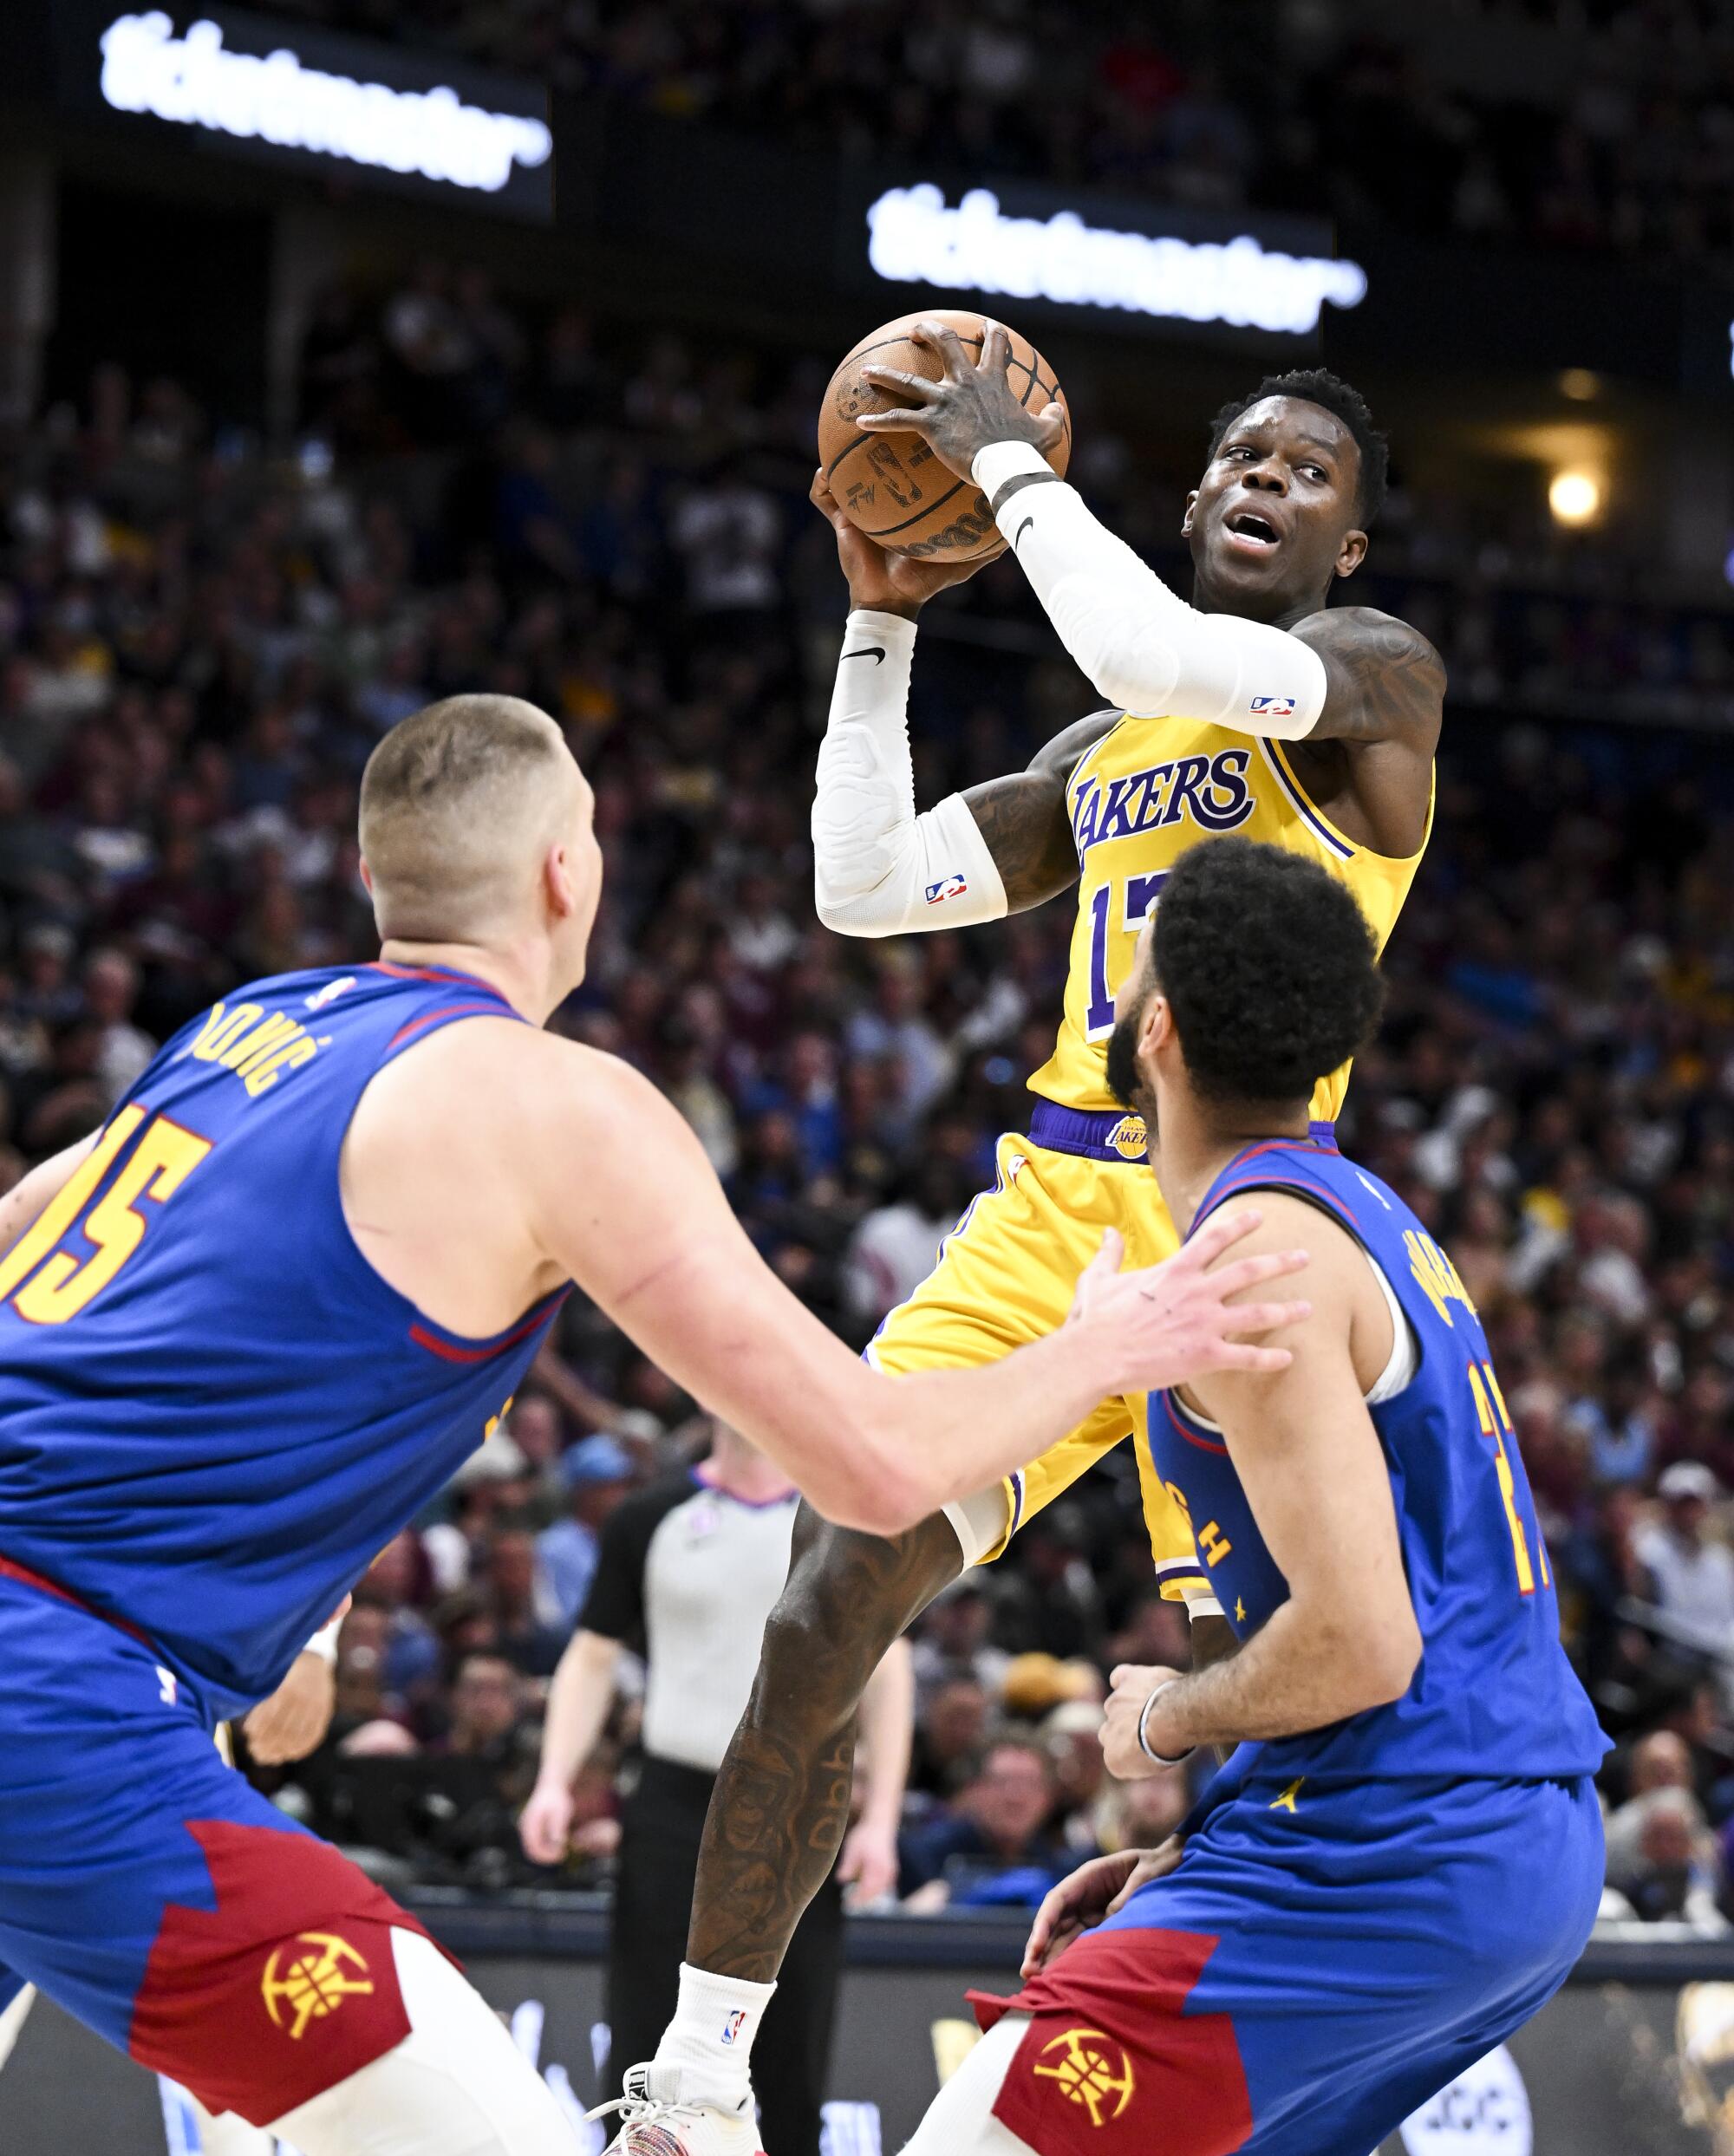 Lakers guard Dennis Schroder looks pass the ball while Nuggets guard Jamal Murray and center Nikola Jokic defend.